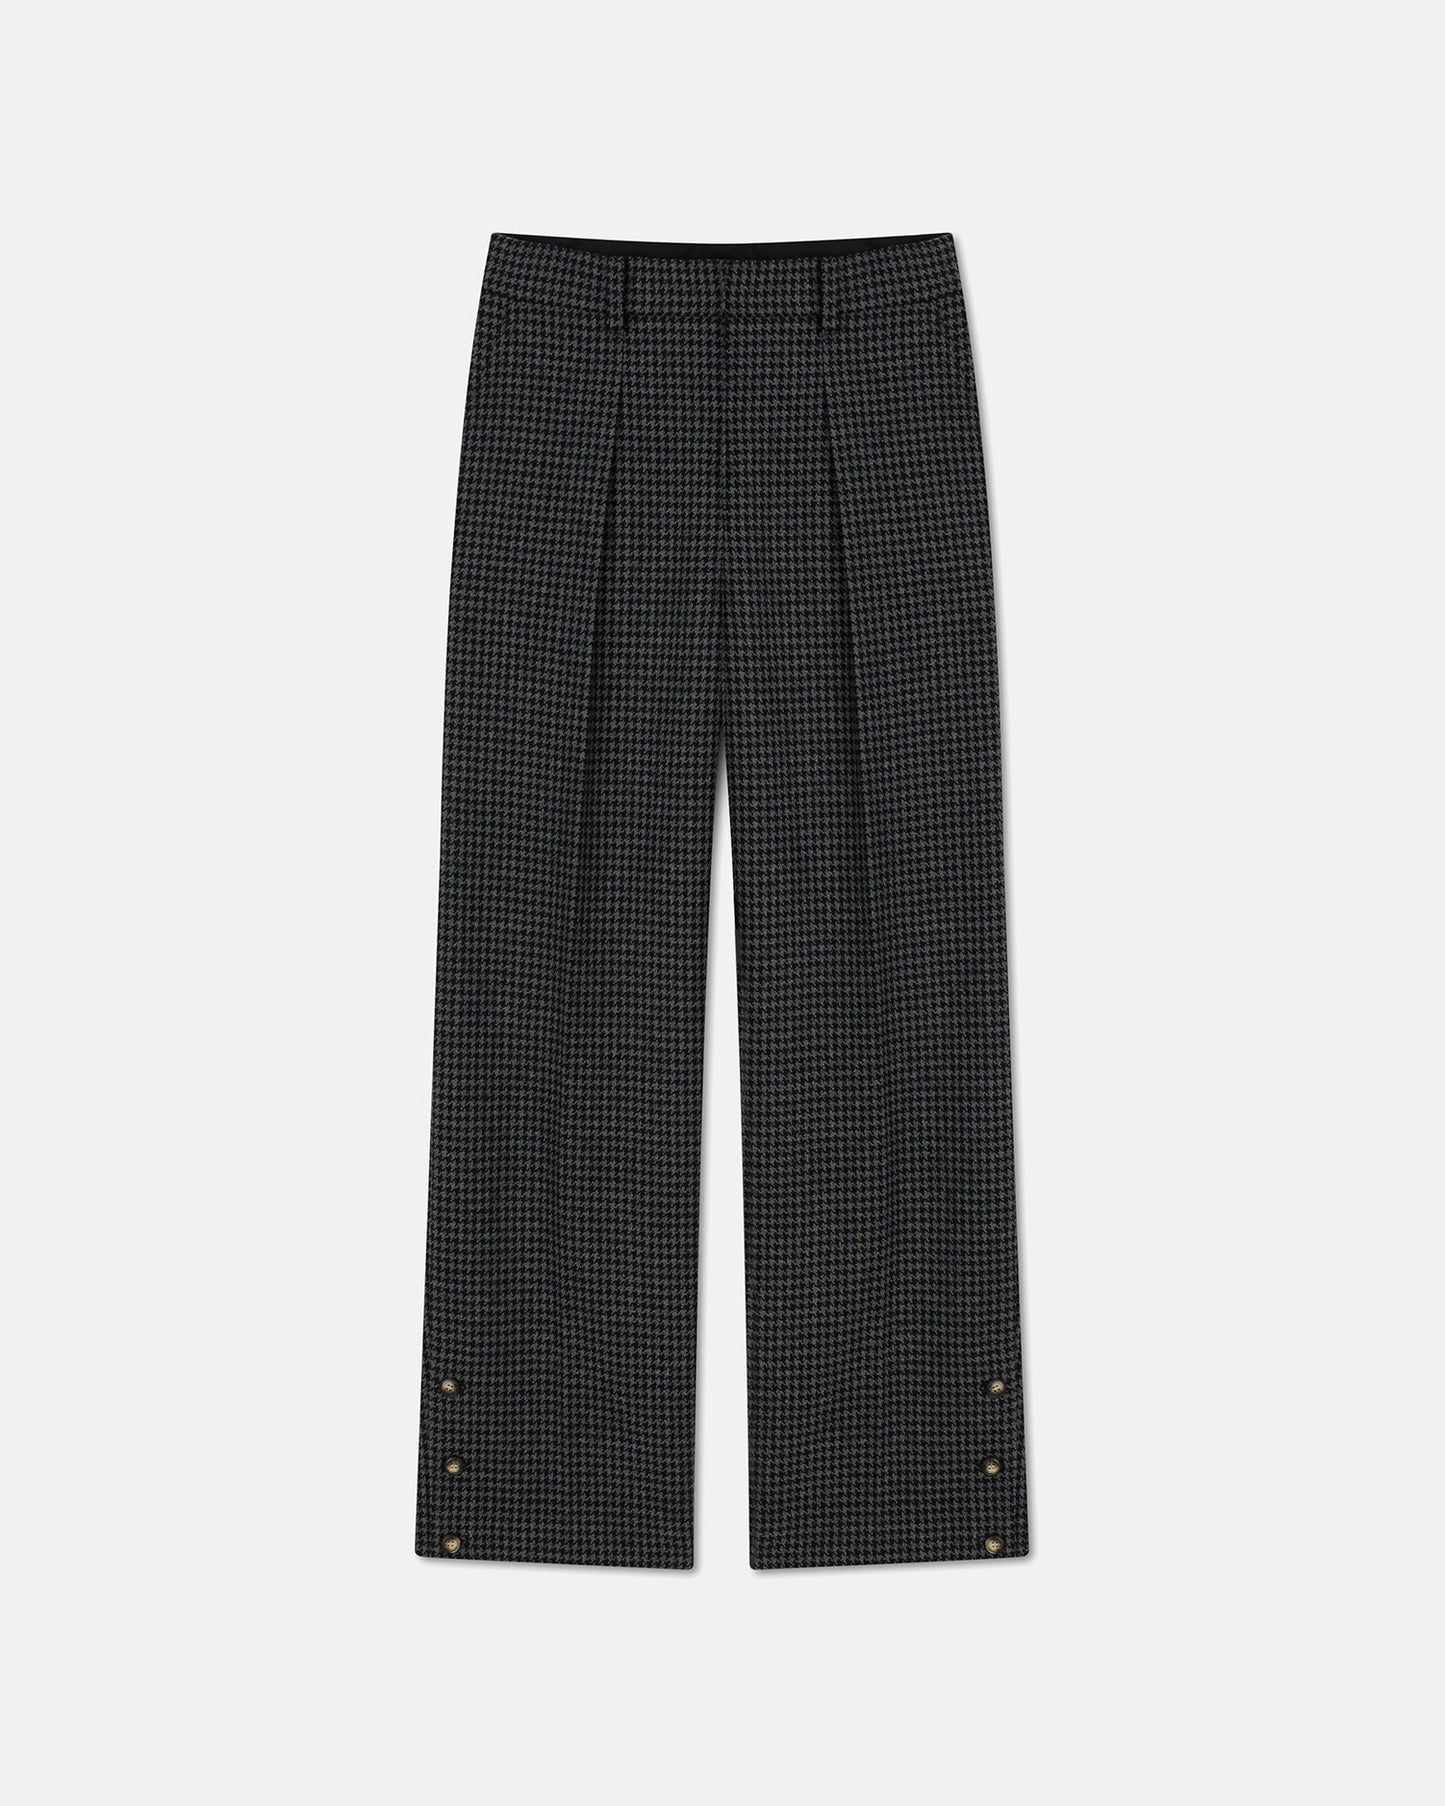 Wilco Cropped - Houndstooth Wool Cropped Pants - Grey Black Houndstooth